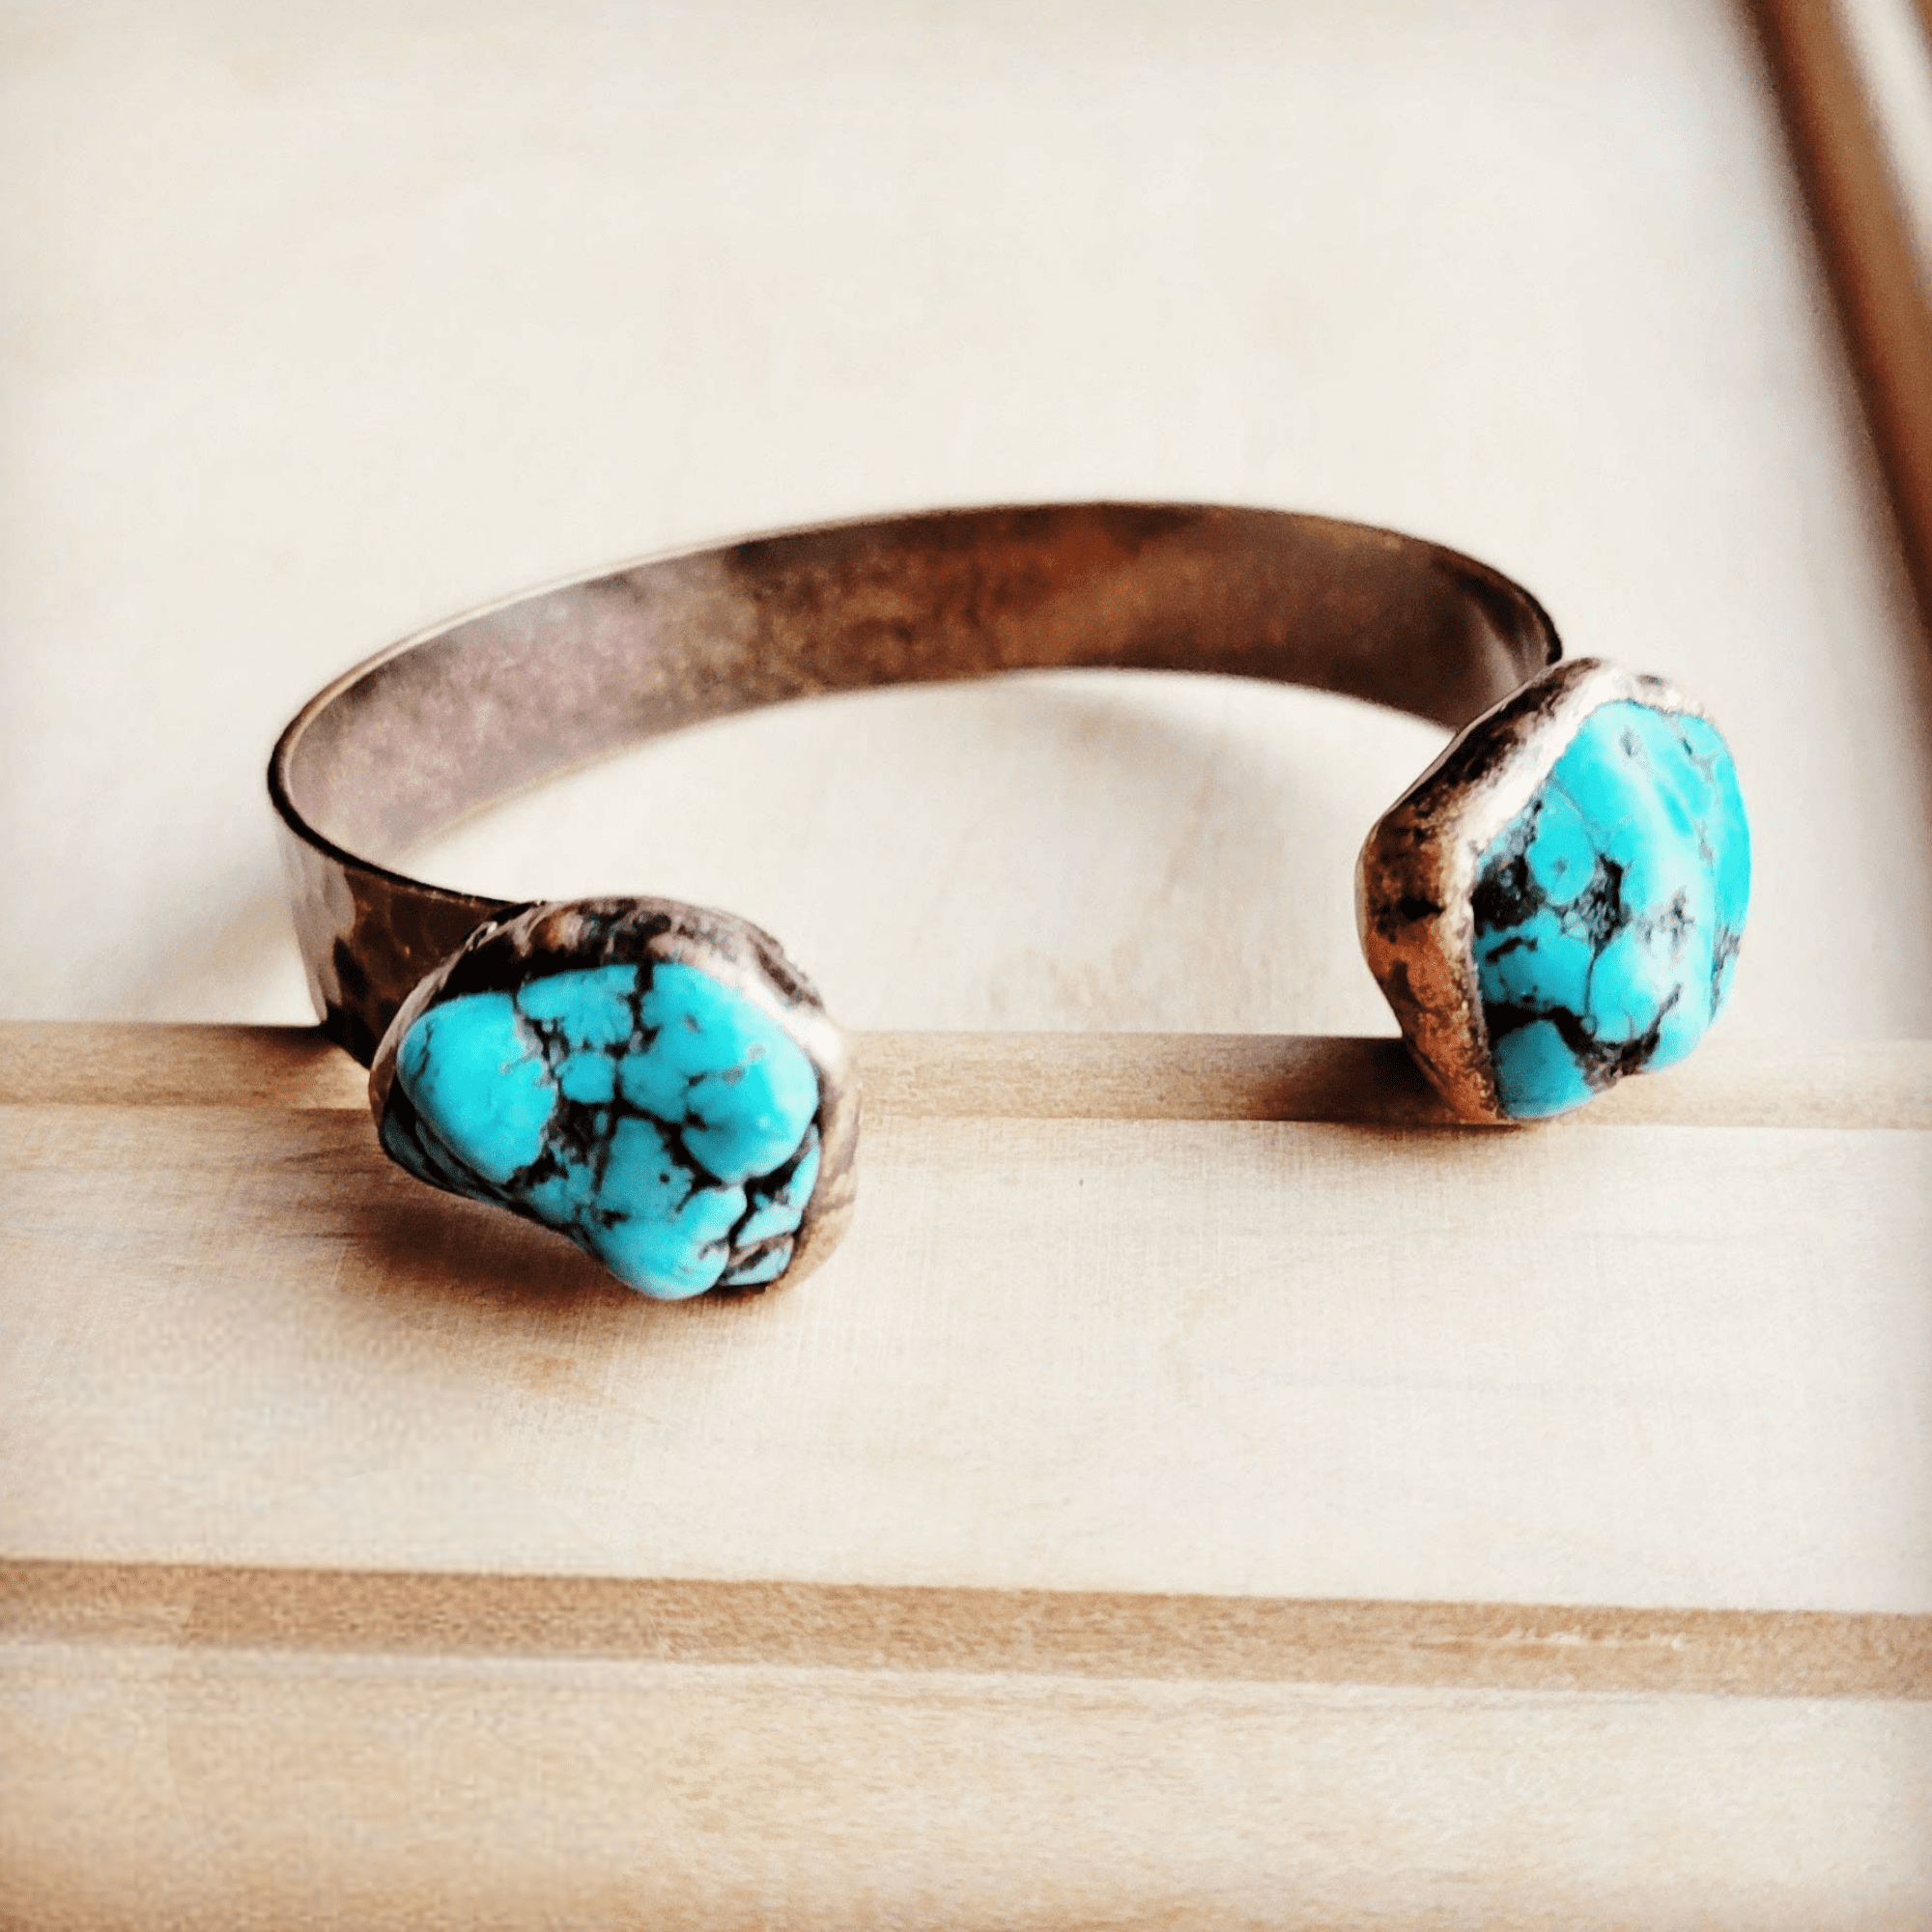 Genuine Natural Turquoise Cuff Bangle Bracelet in Copper - Ranch Junkie Mercantile LLC